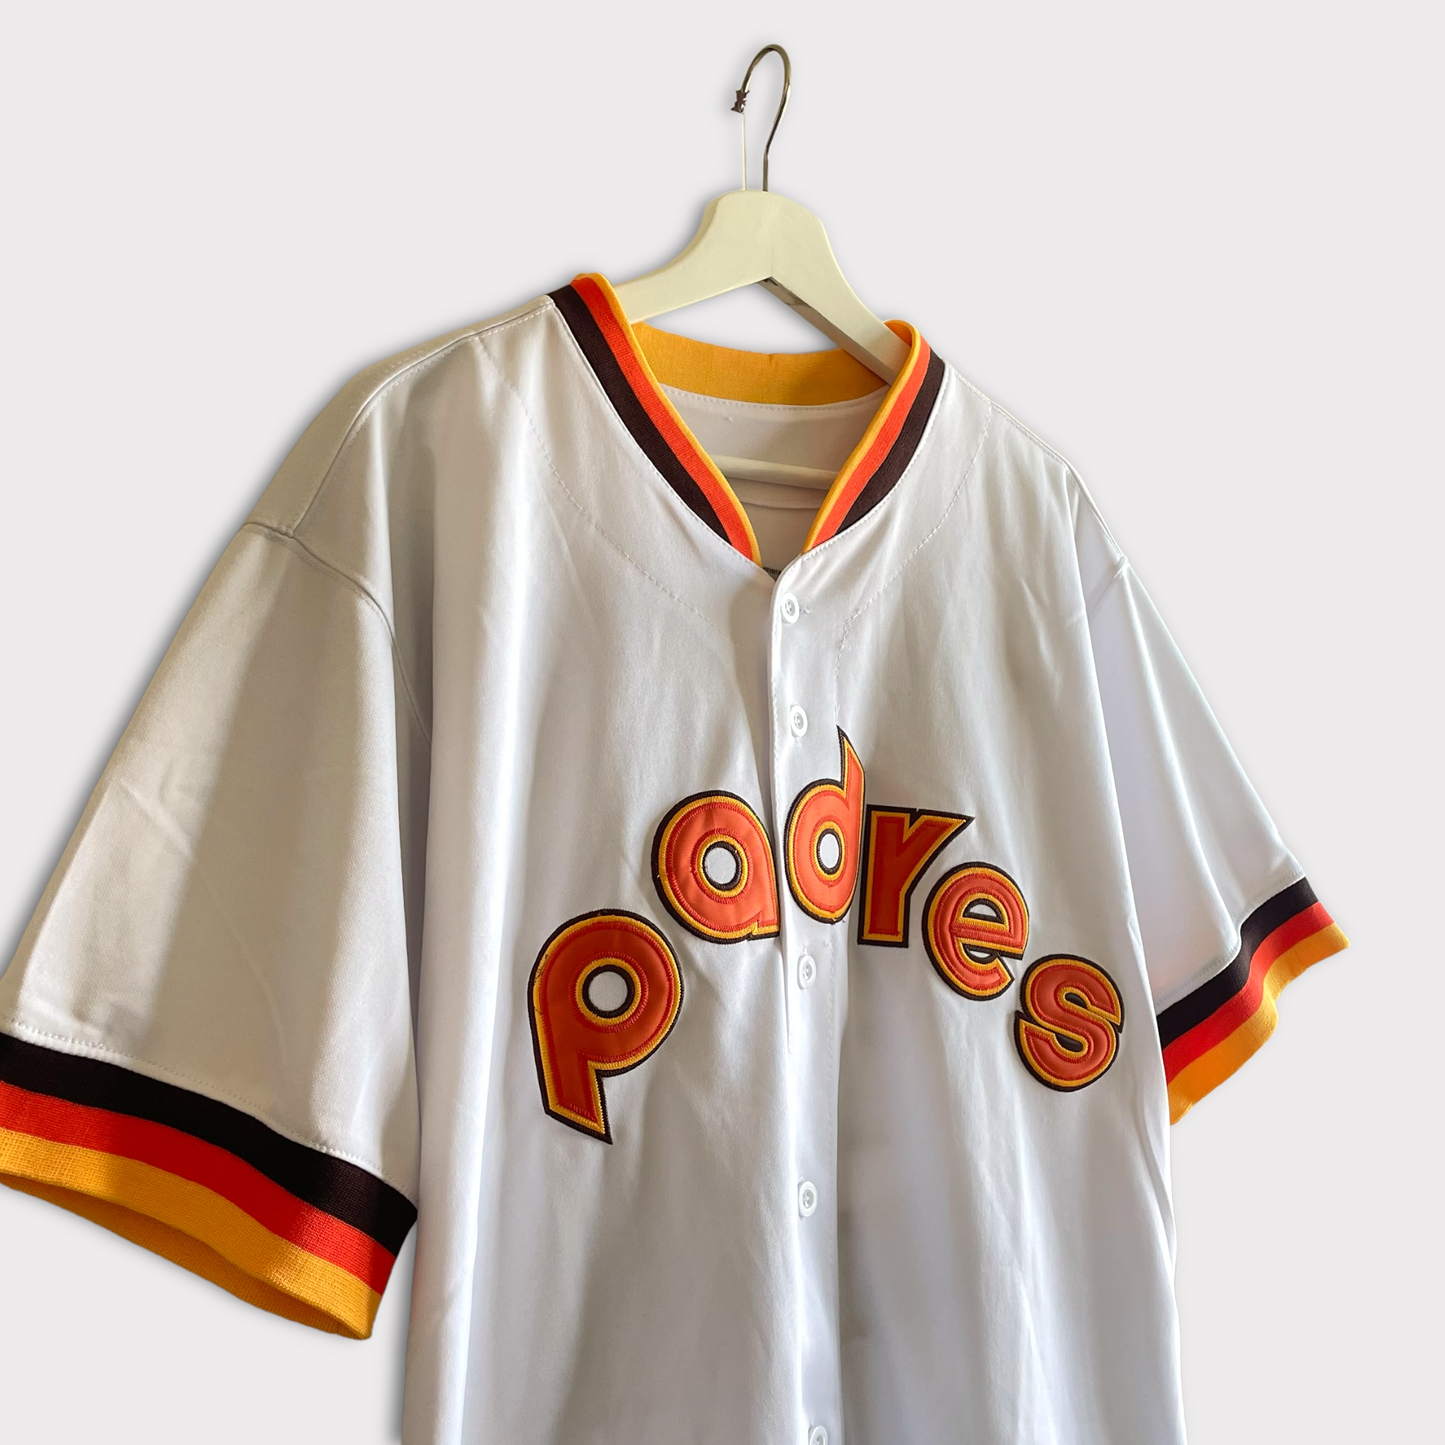 MLB Dave Winfield #31 Padres Jersey